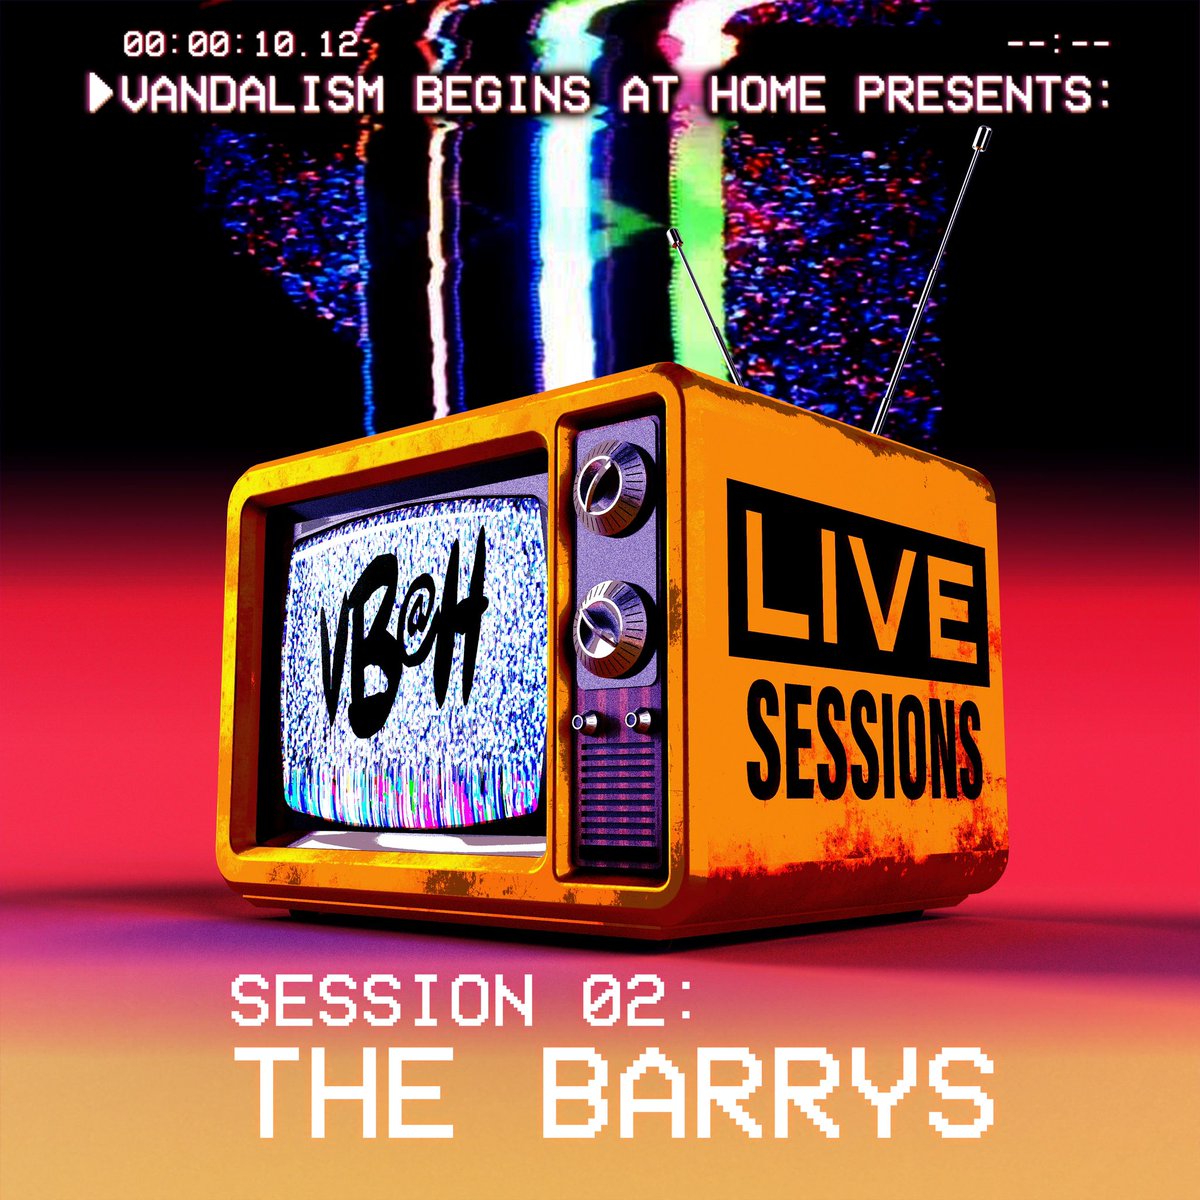 VBAH LIVE SESSIONS TOMORROW AT 6PM @barrys_the @TheCastleLive SUBSCRIBE AT THE LINK youtube.com/@vbahrecords?s…